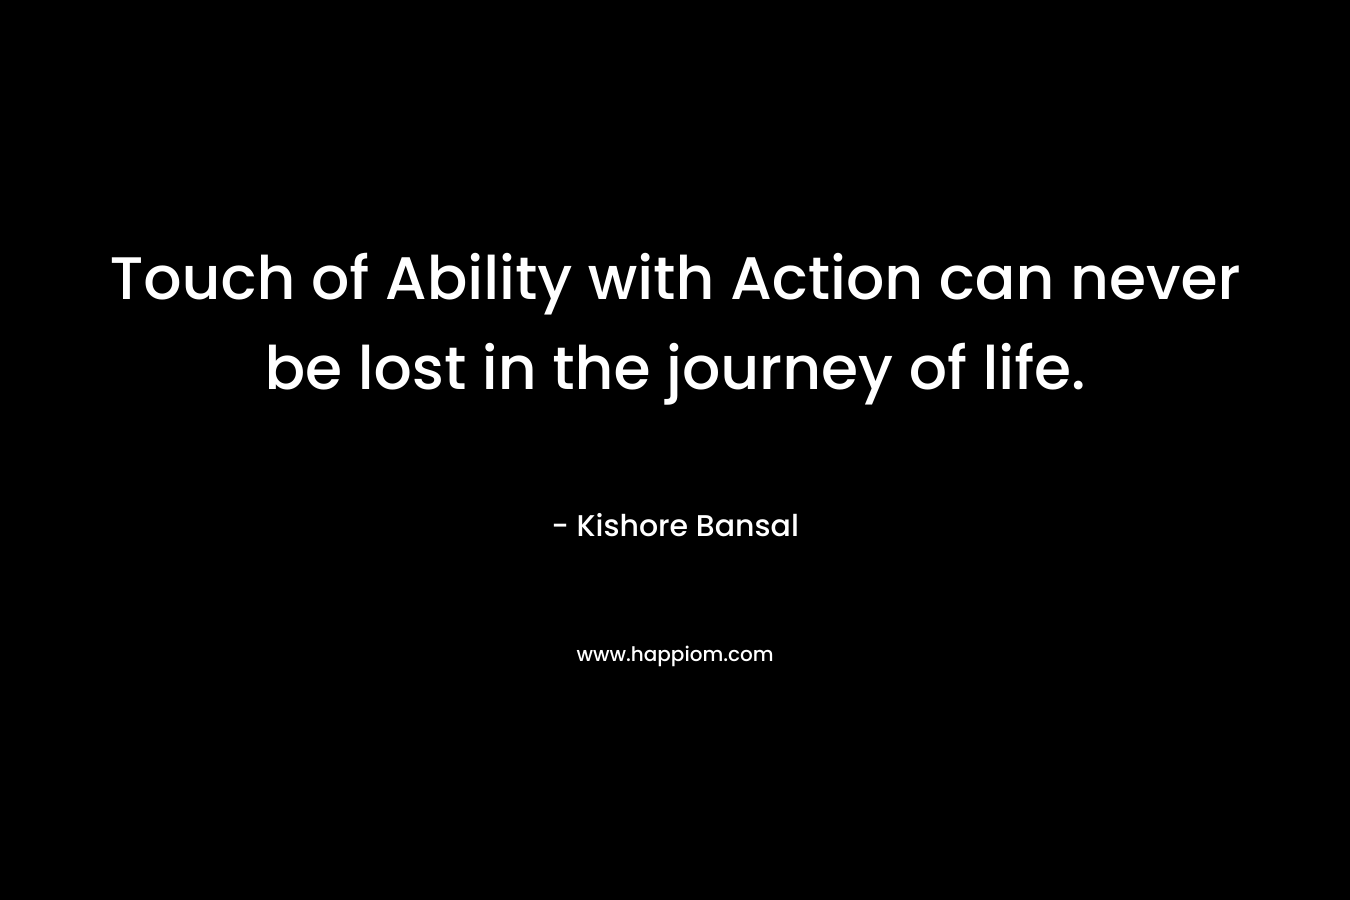 Touch of Ability with Action can never be lost in the journey of life.